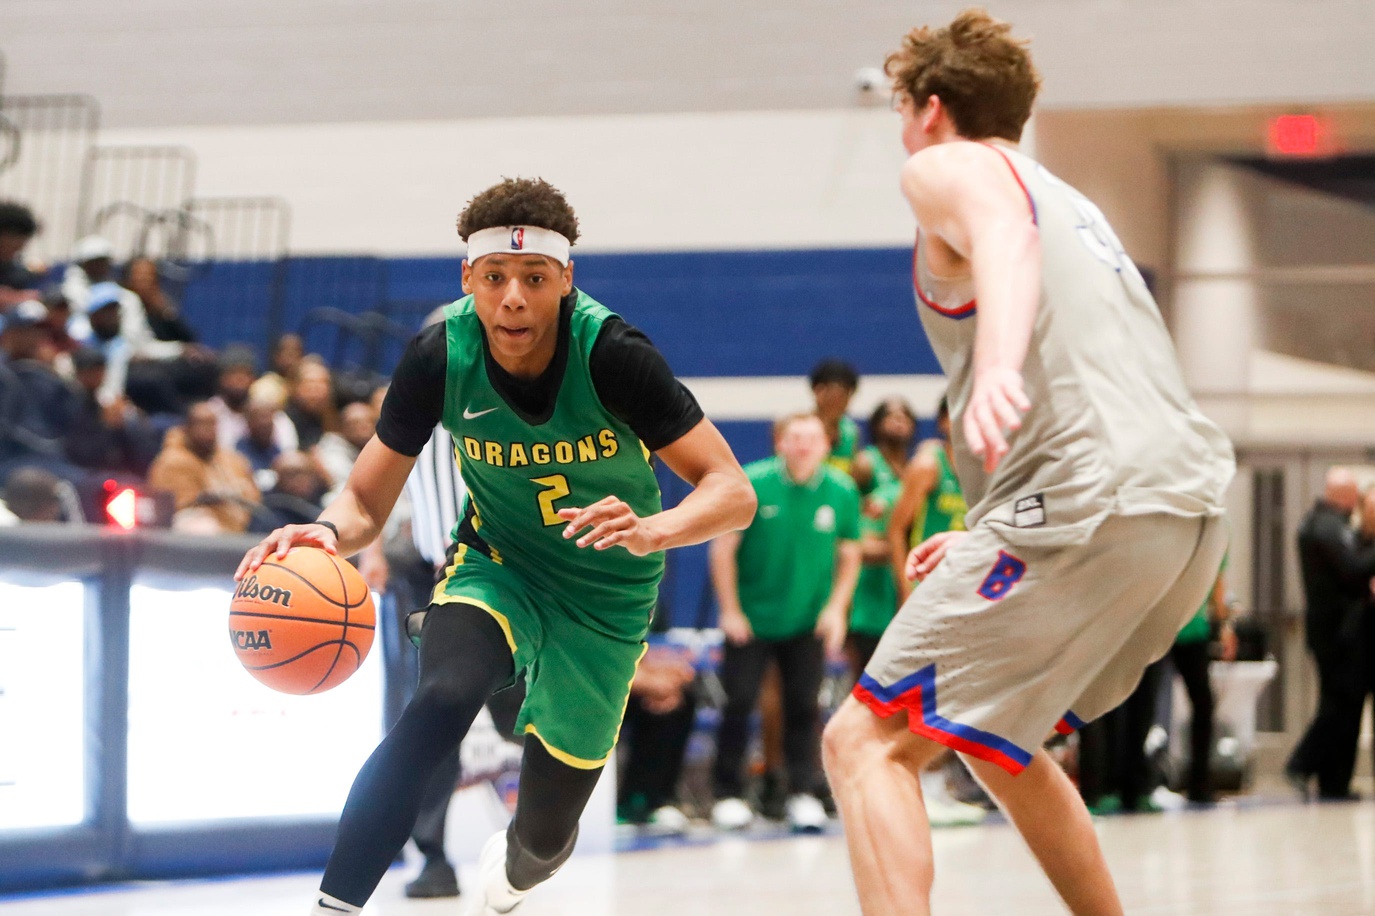 Michigan State basketball target Jeremiah Fears dribbles against the defense.